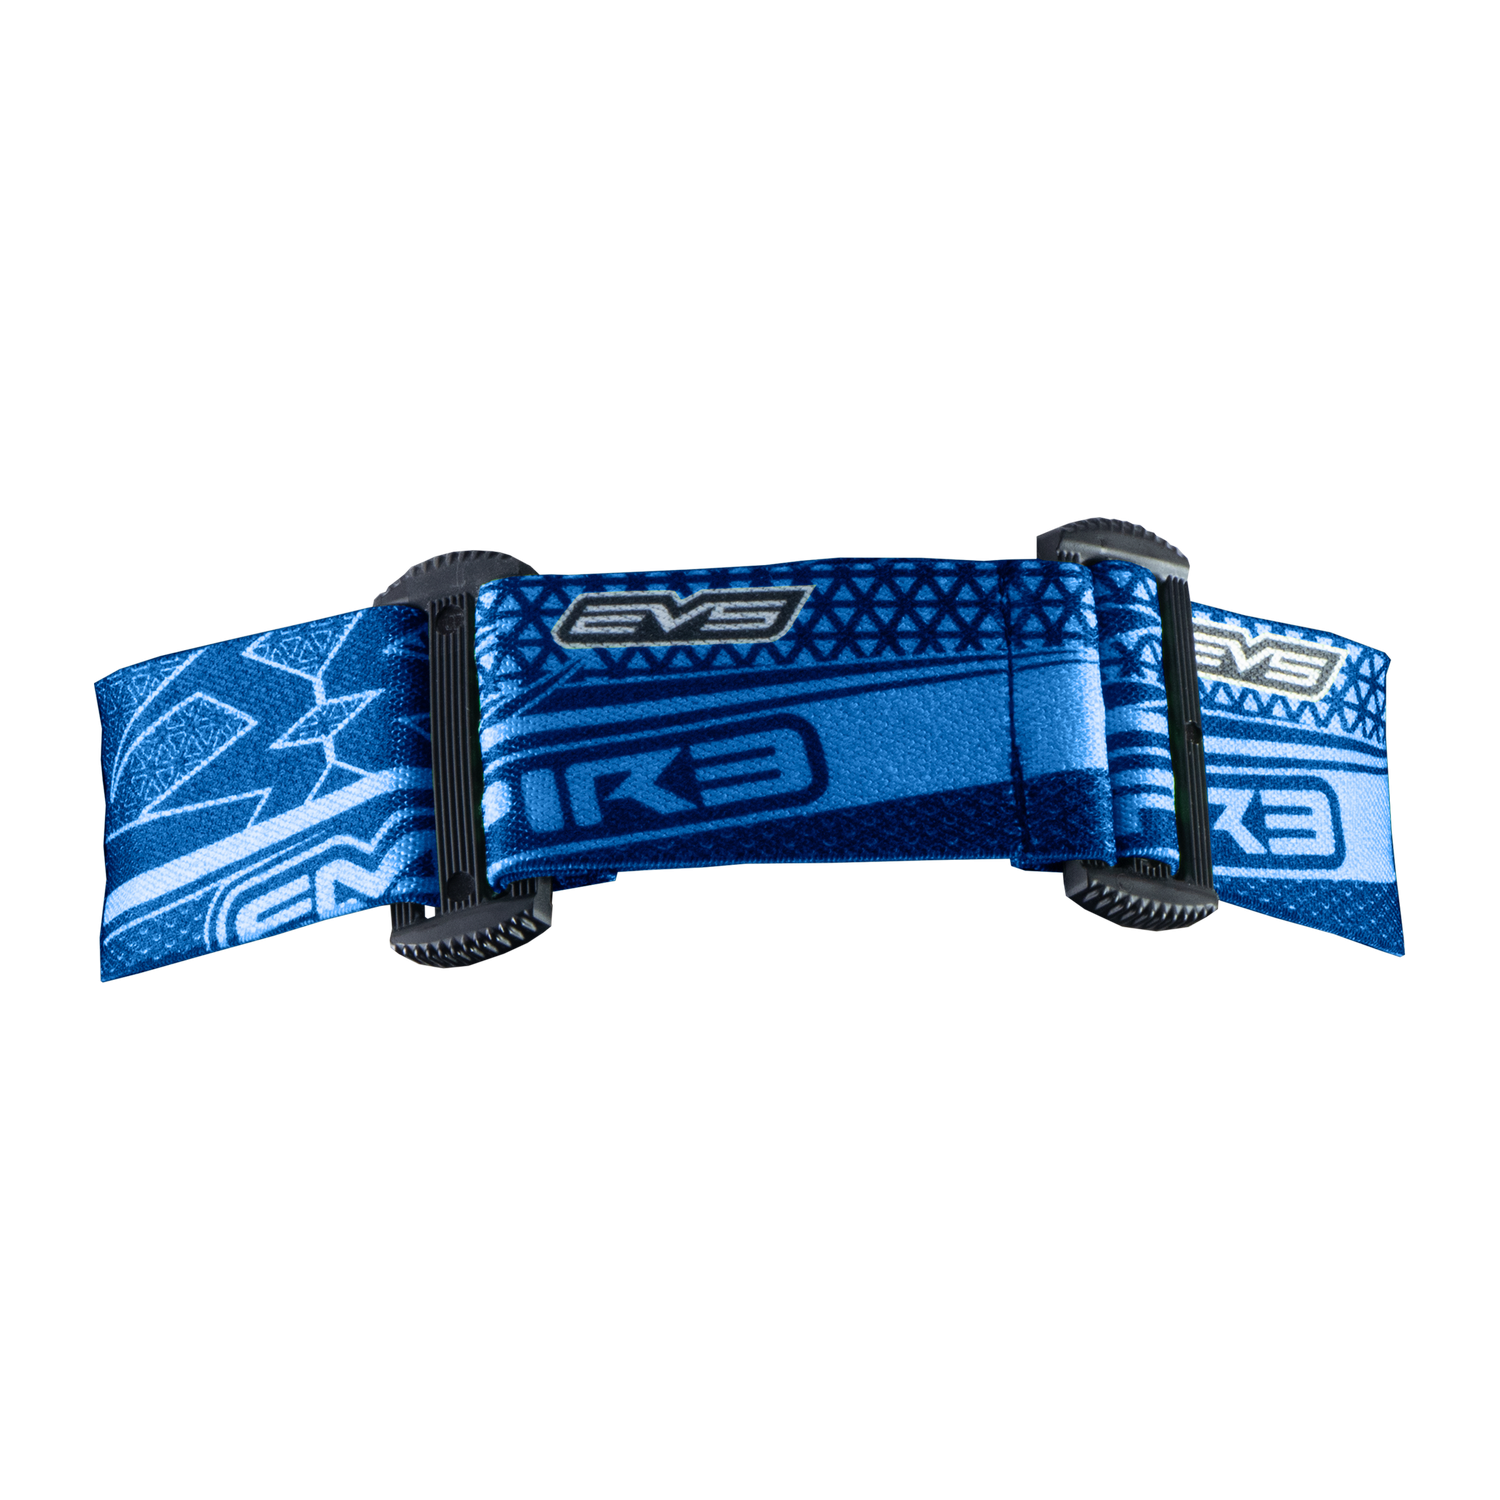 Empire EVS Goggle SE Black / Blue - Thermal Ninja Lens - Eminent Paintball And Airsoft